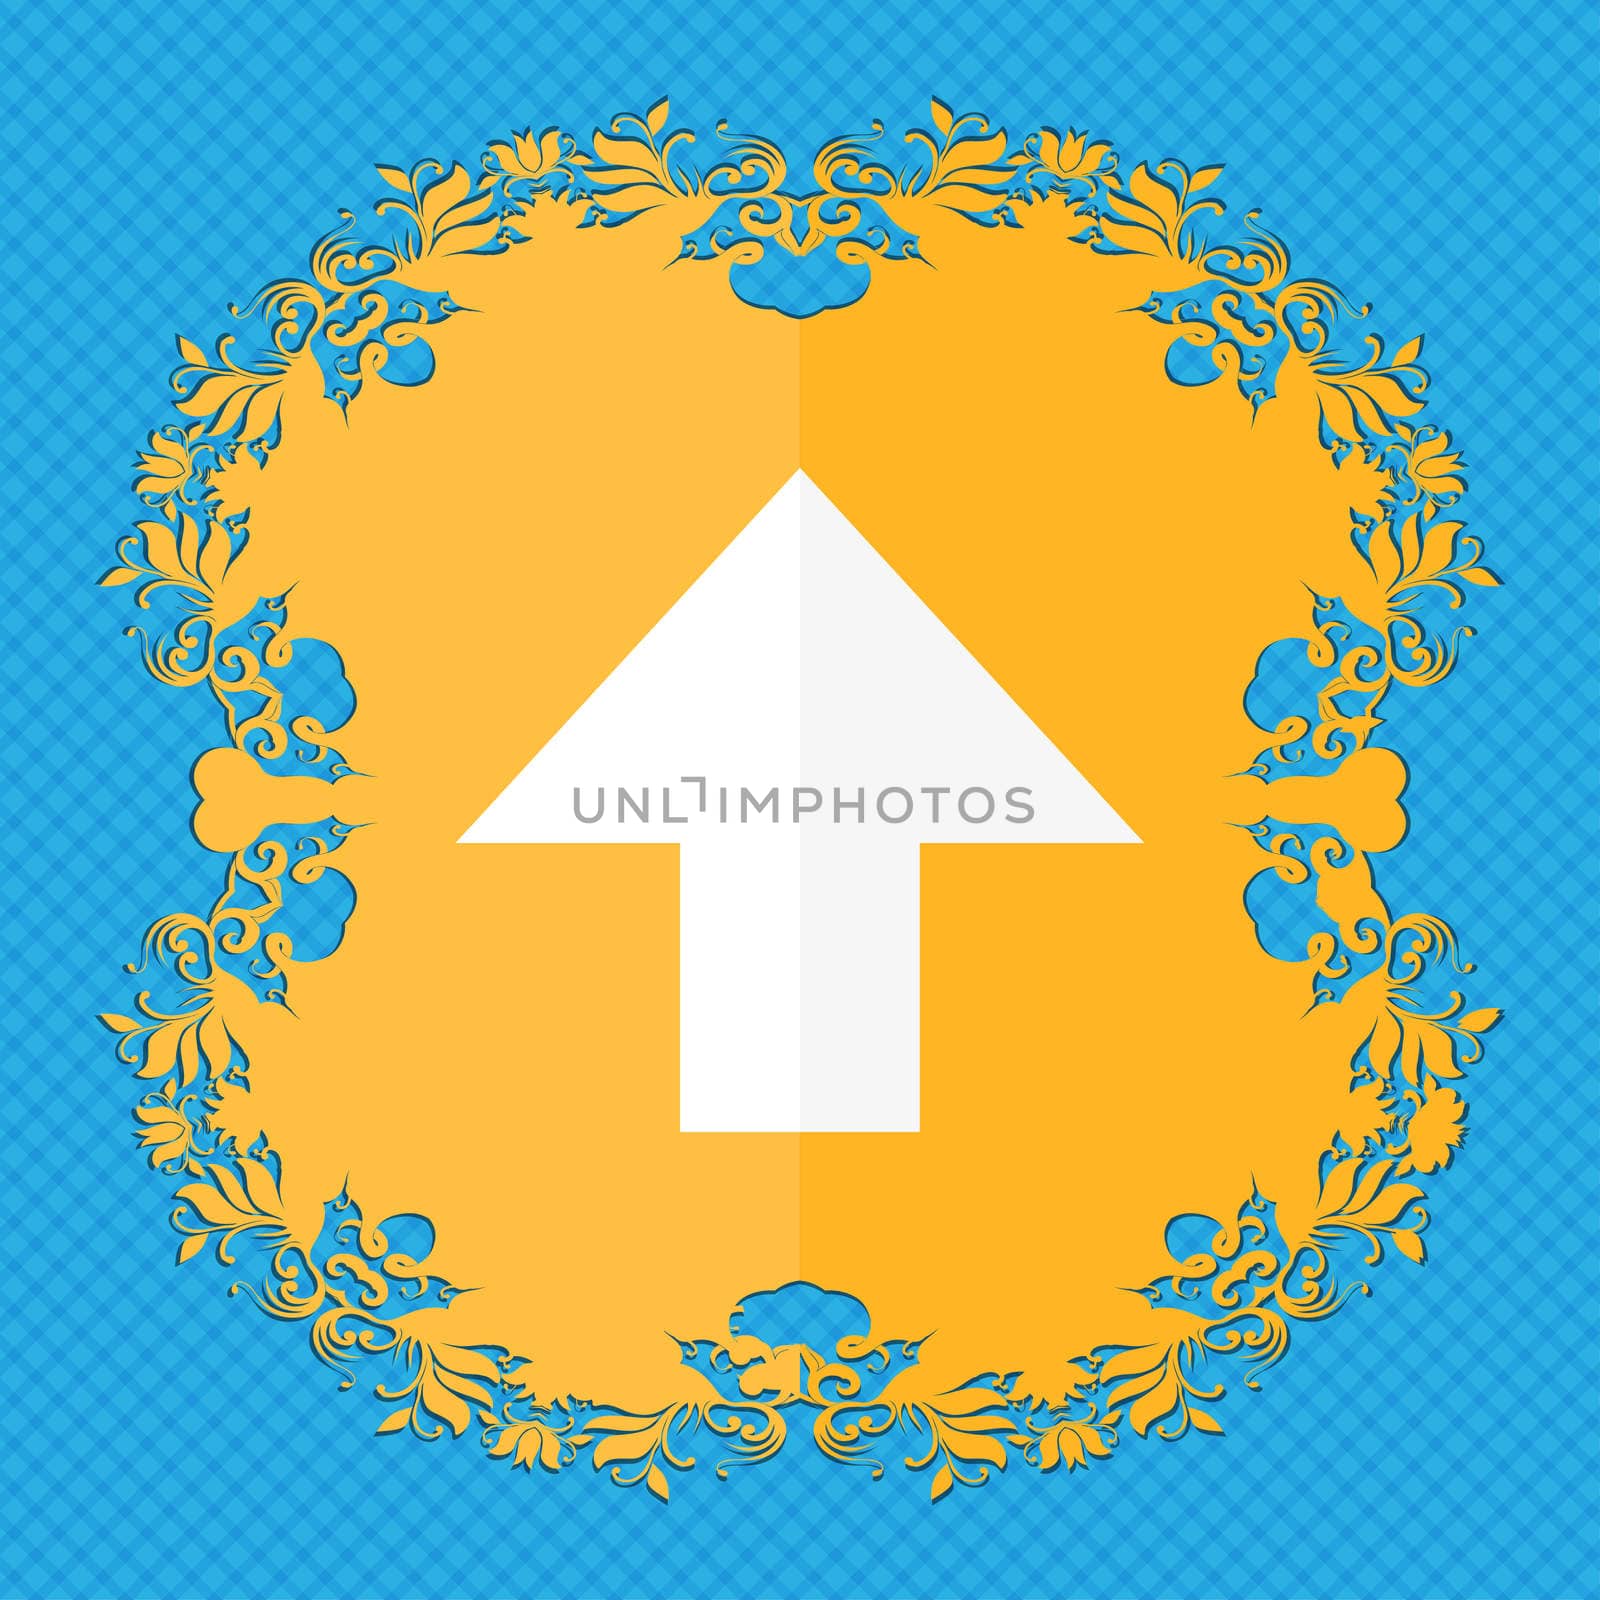 This side up sign icon. Fragile package symbol. Floral flat design on a blue abstract background with place for your text. illustration